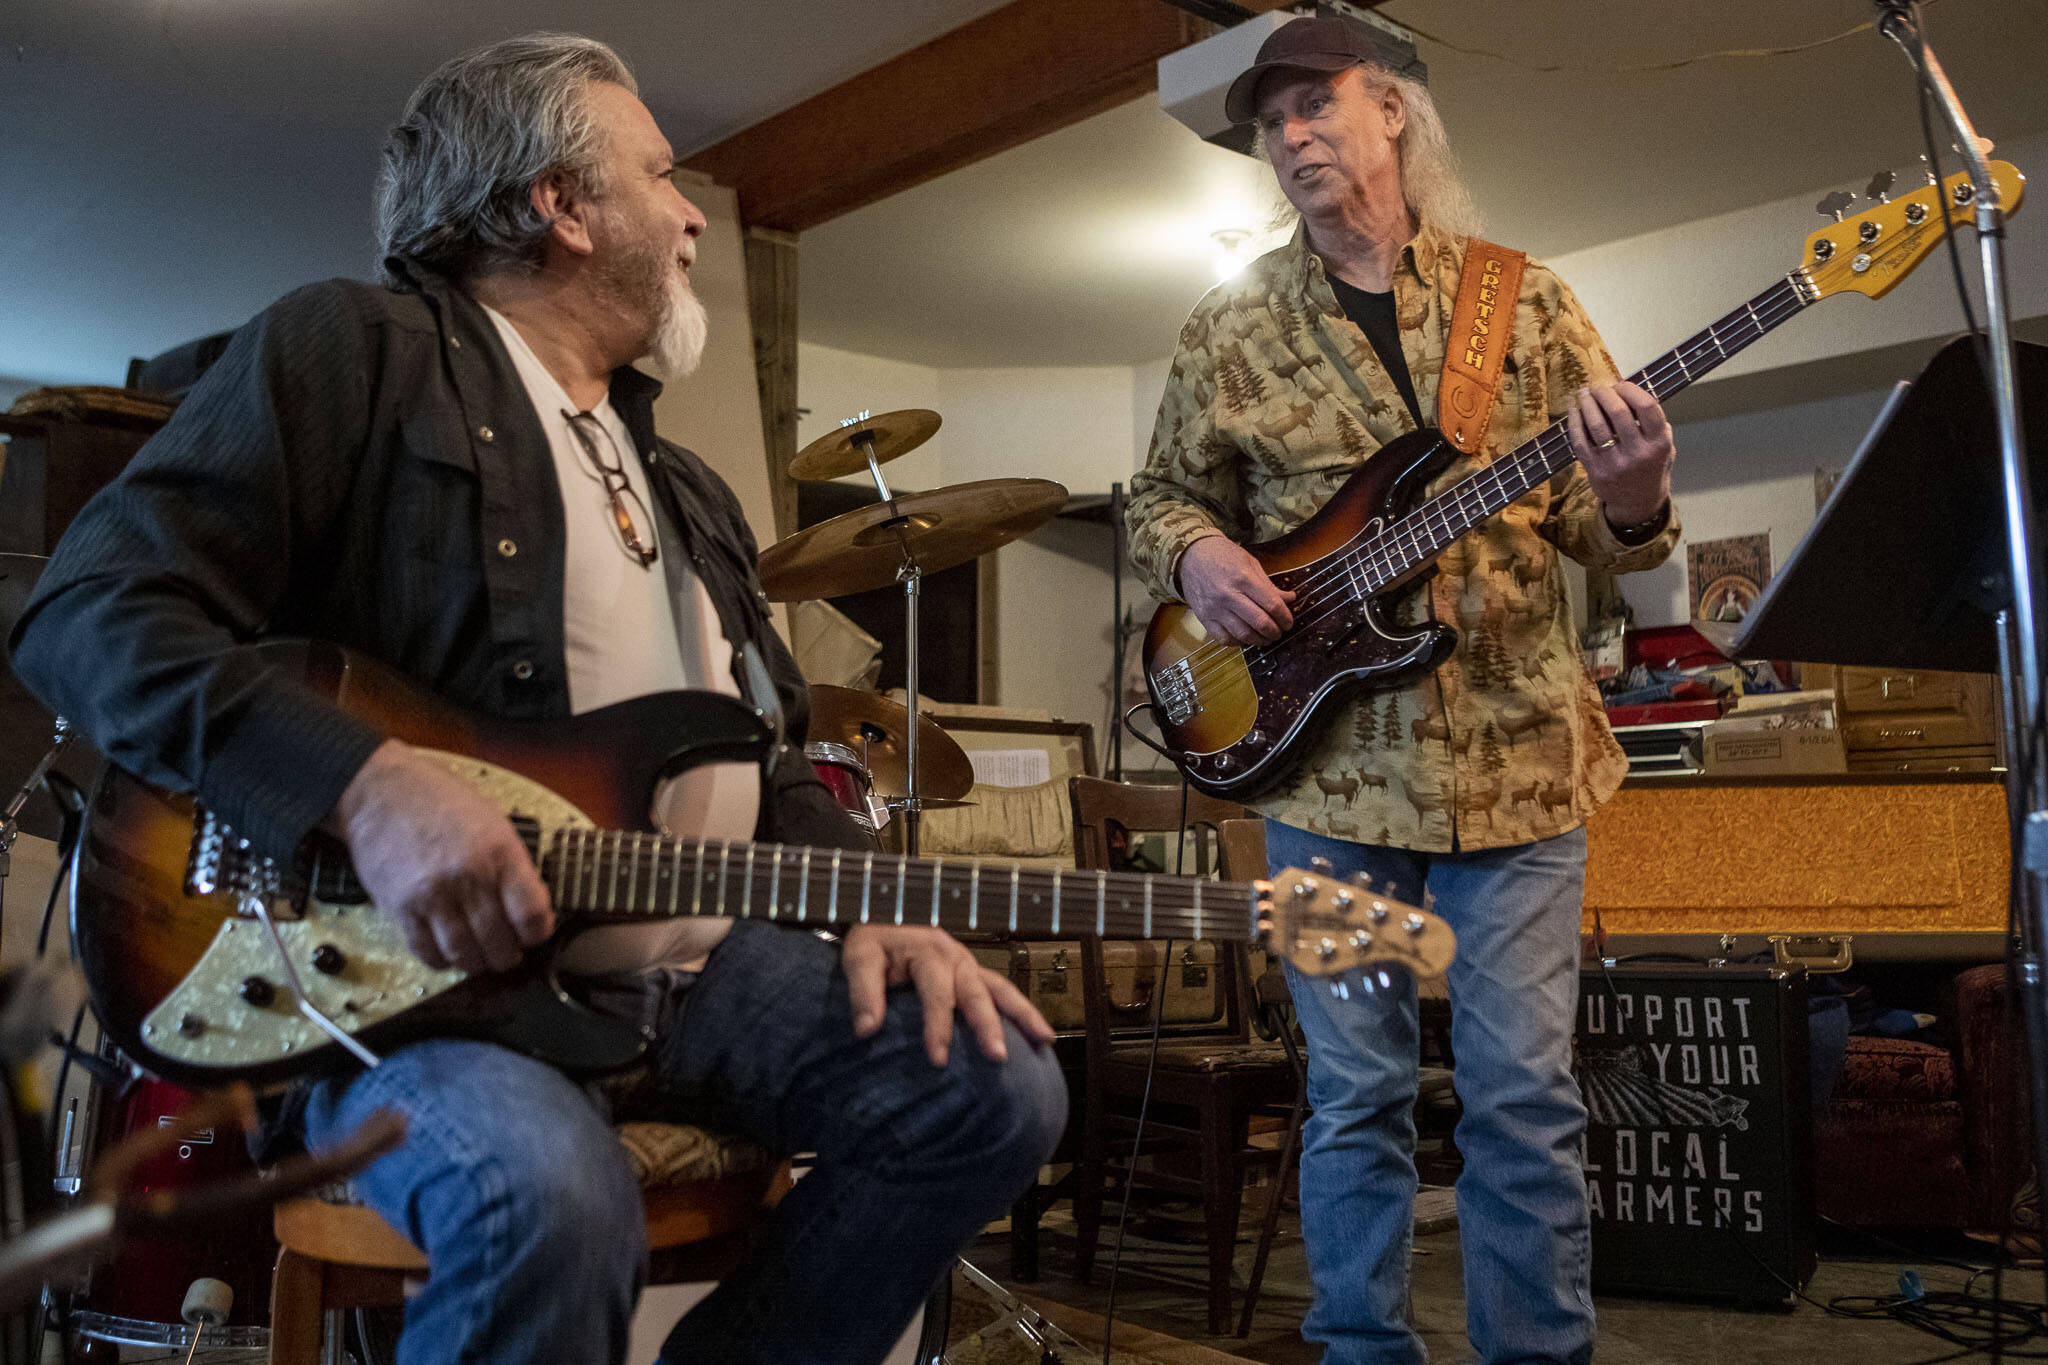 Lonnie Mueller, left, and Jim Kehoe chat during a Dan Canyon Band rehearsal in the group’s practice barn in Arlington, Washington, on Saturday, March 11, 2023. (Annie Barker / The Herald)